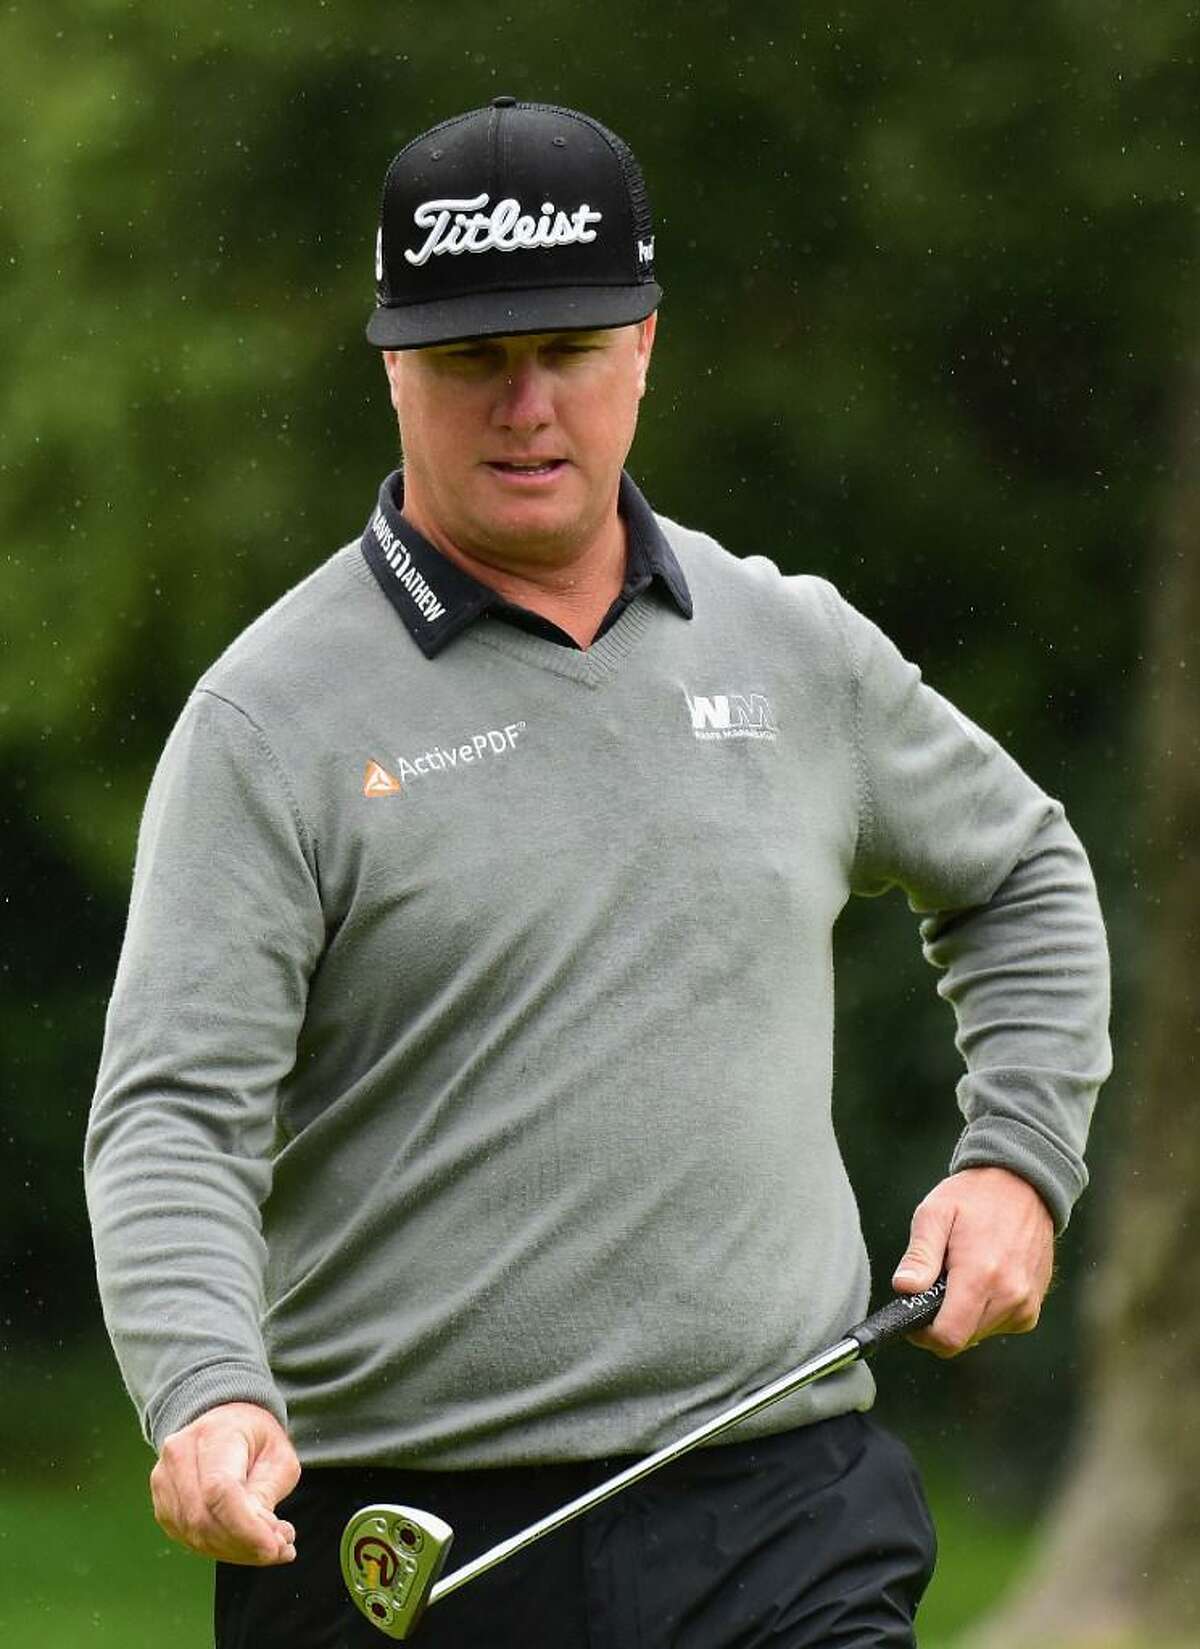 .Charley Hoffman reacts to his birdie on the 12th hole during a continuation of the second round at the Genesis Open at Riviera Country Club on Feb. 18, 2017 in Pacific Palisades, California.